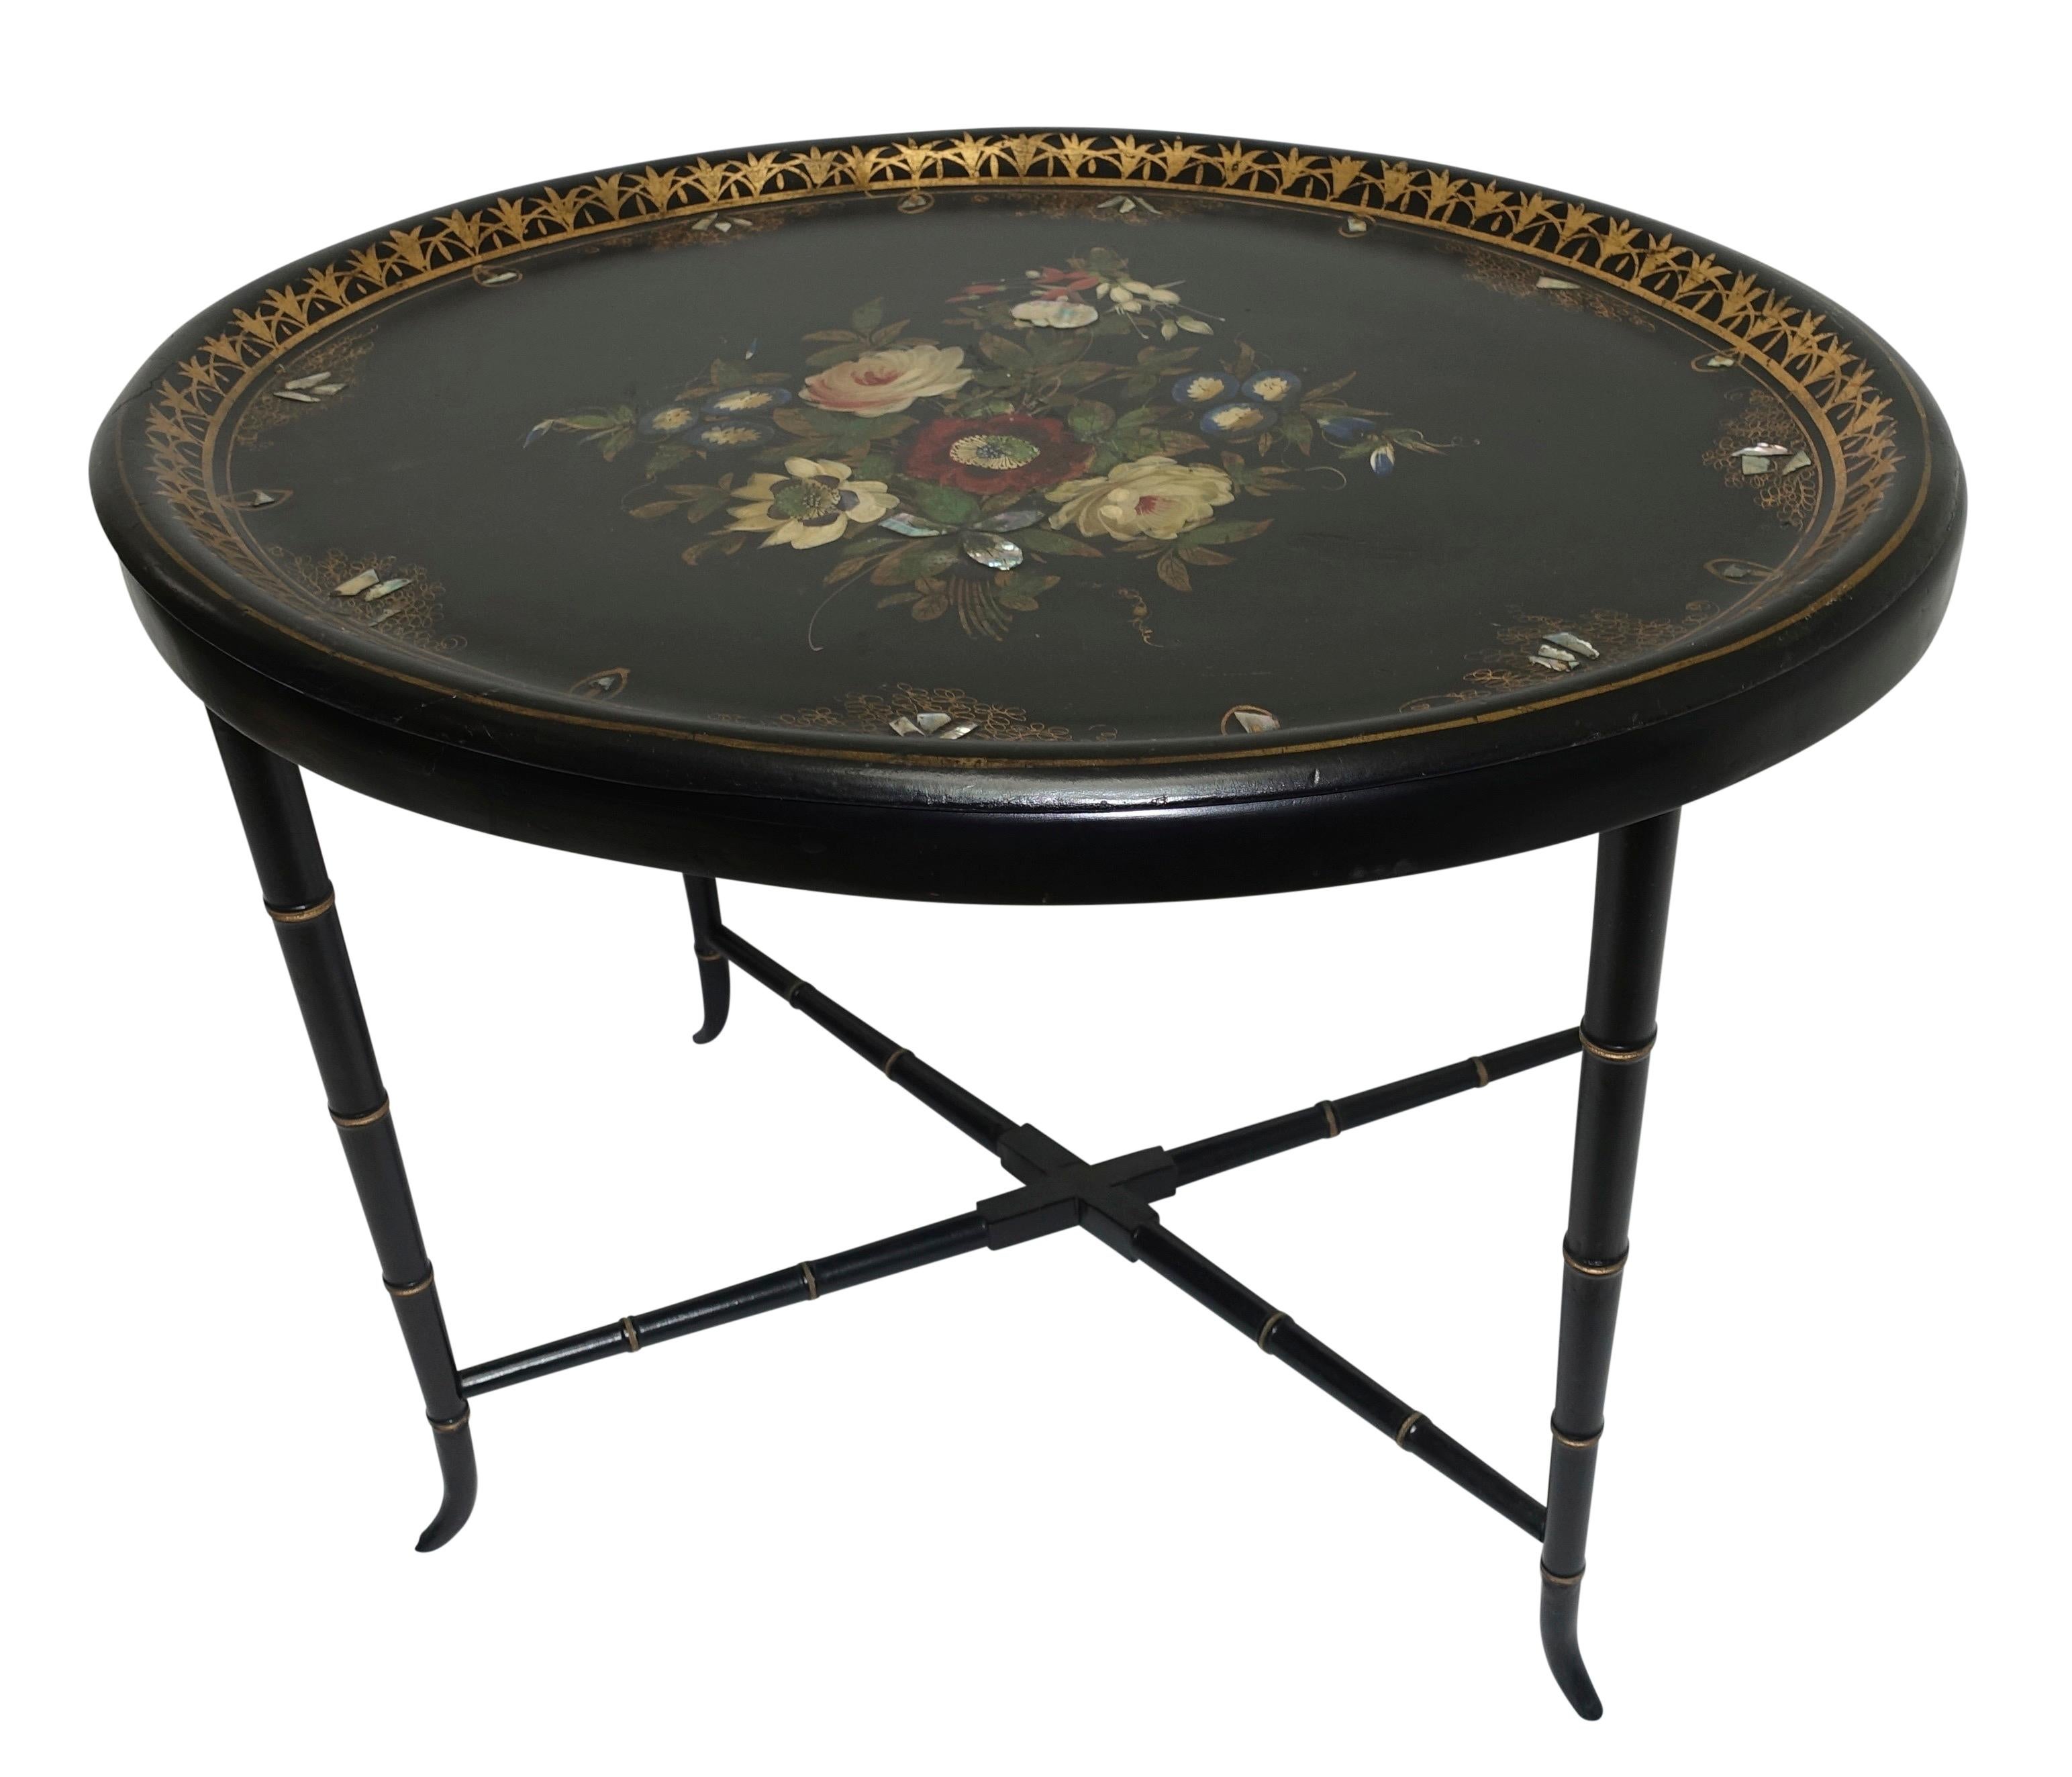 Lovely oval black papier mâché tray on a later stand, having hand painted flowers, mother of pearl inlay and gilt painted banded border. The Stand with faux bamboo legs, England, circa 1860.